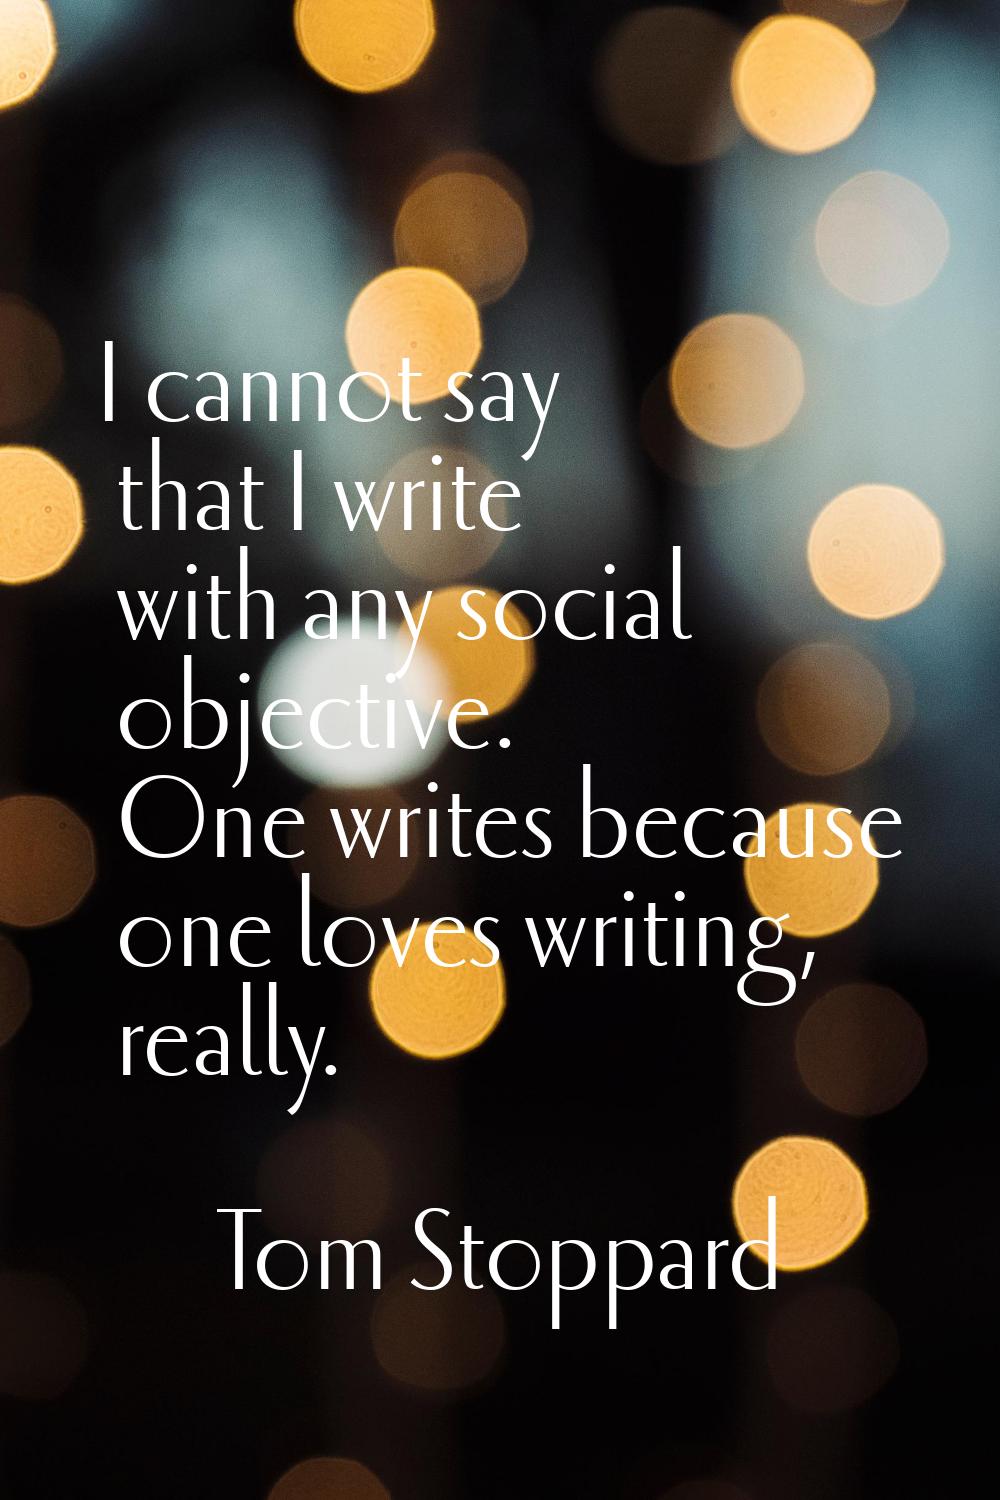 I cannot say that I write with any social objective. One writes because one loves writing, really.